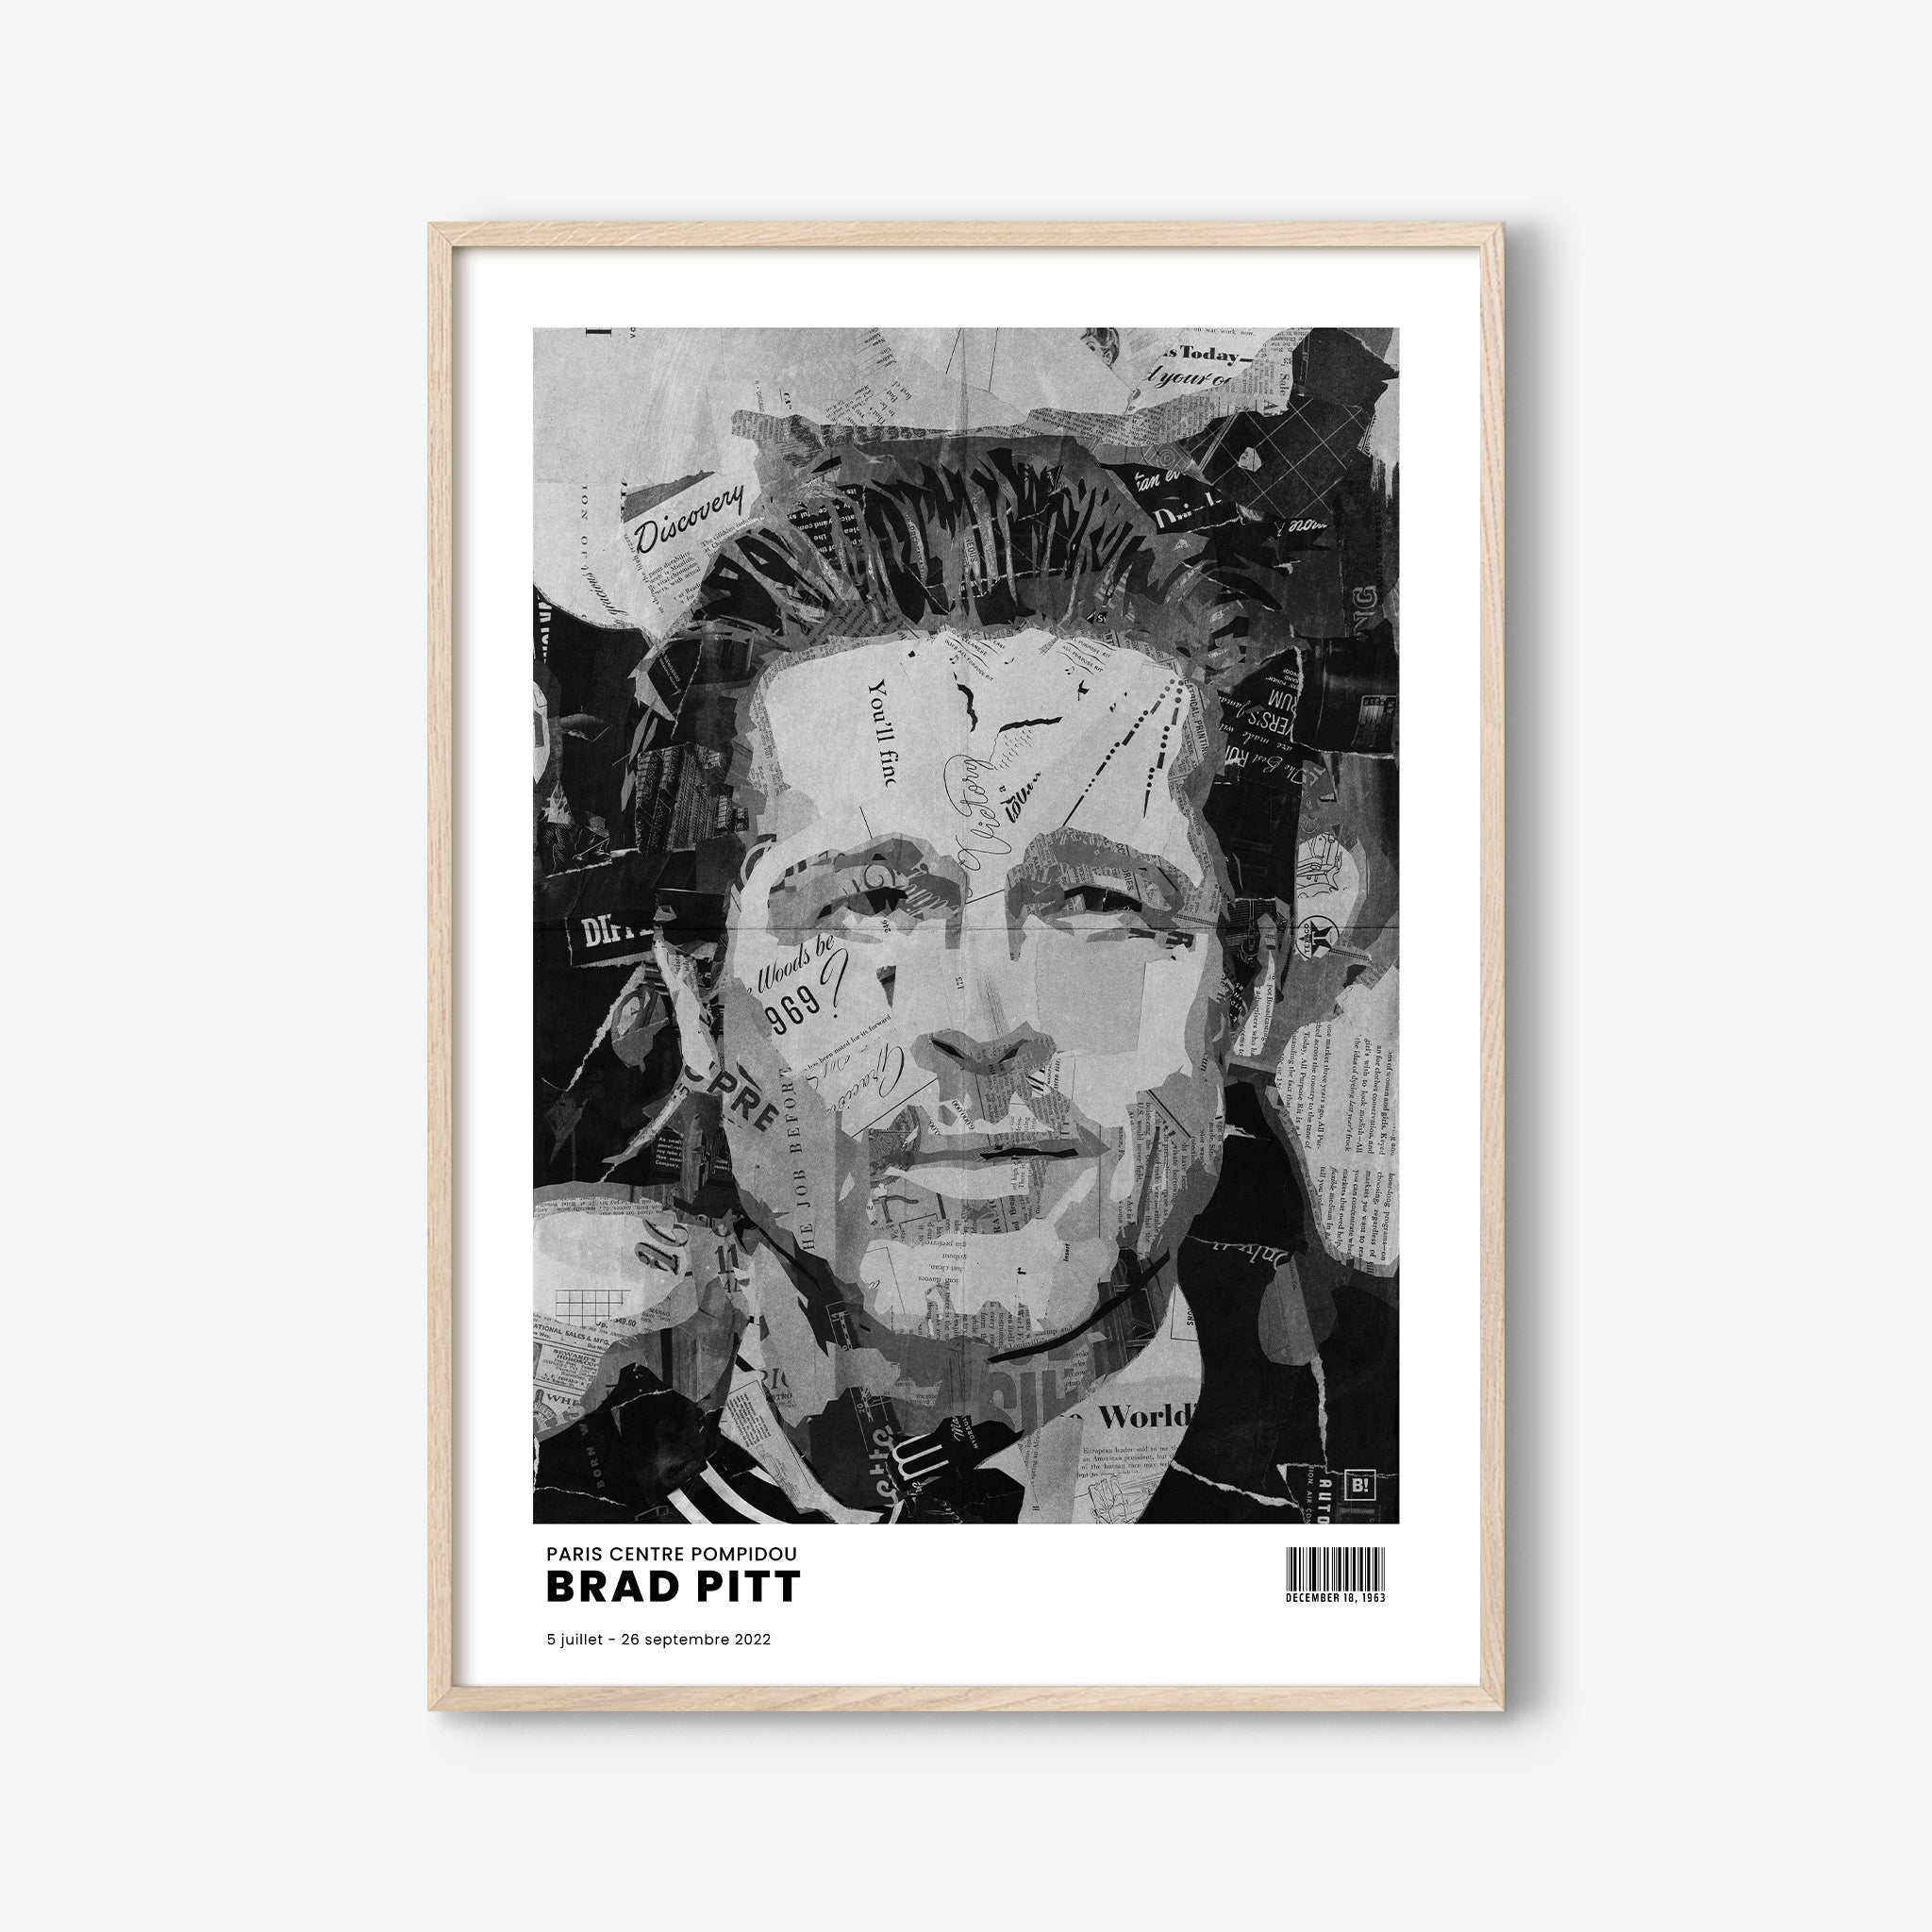 Be inspired by Iconic Brad Pitt Paris Centre Pompidou Exhibition Art Print. The artwork is presented in a white oak frame that captures its timeless beauty in every detail.